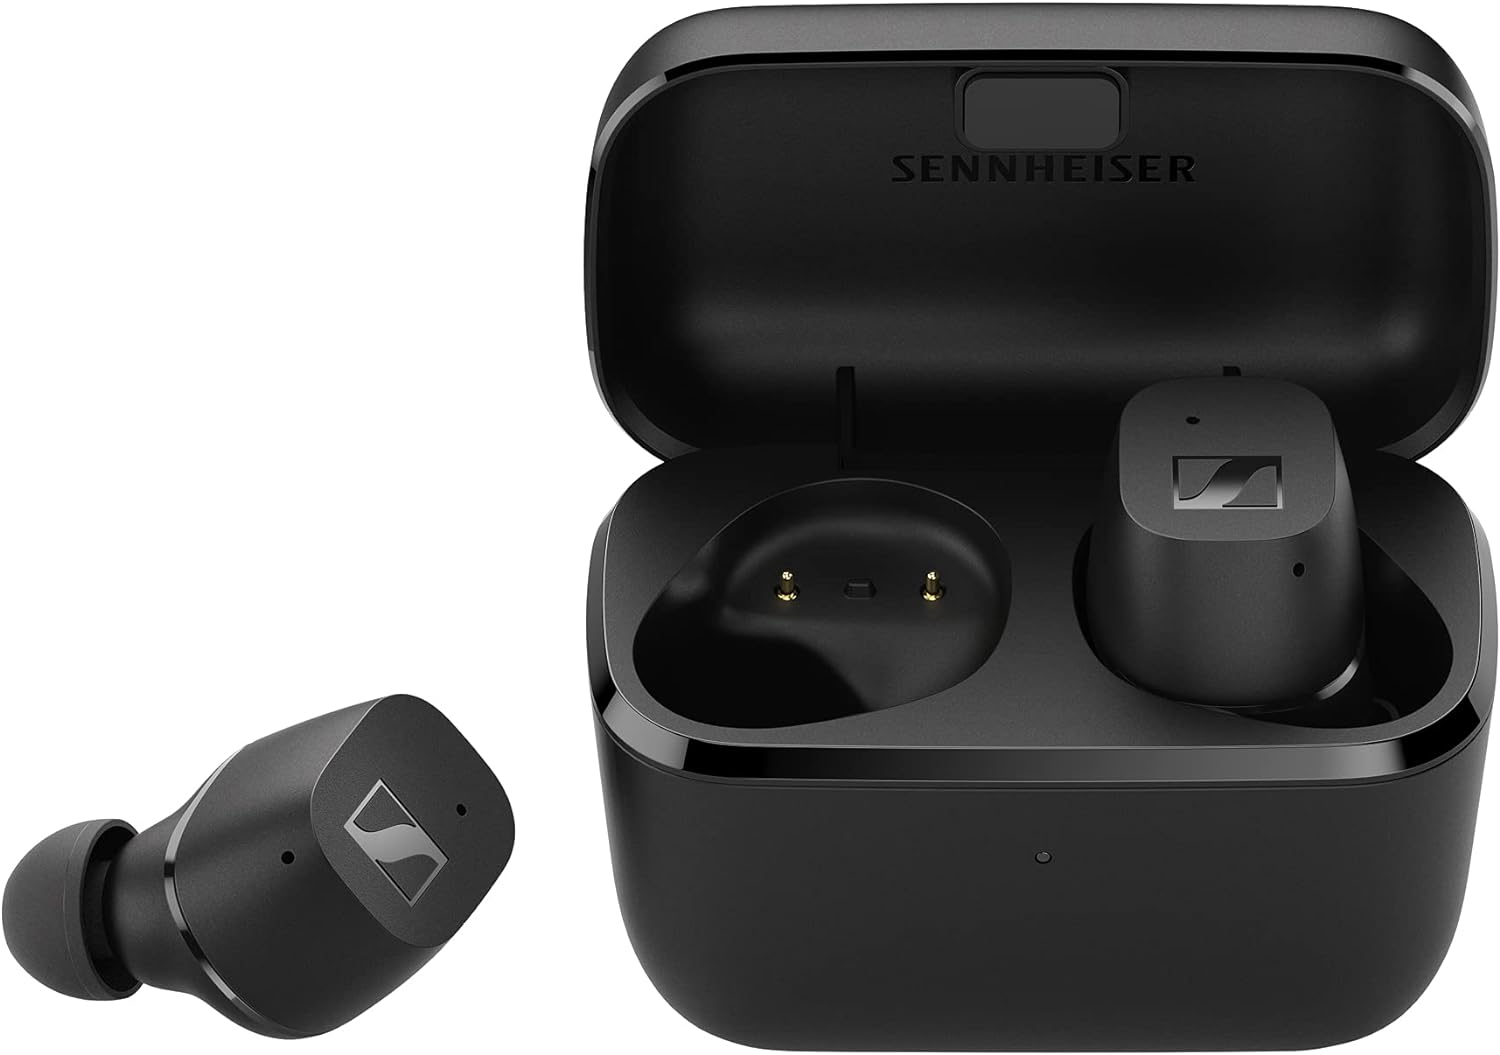 Sennheiser Consumer Audio CX True Wireless Earbuds - Bluetooth In-Ear Headphones for Music and Calls with Passive Noise Cancellation, Touch Controls, Bass Boost, IPX4 and 27-hour Battery Life, Black